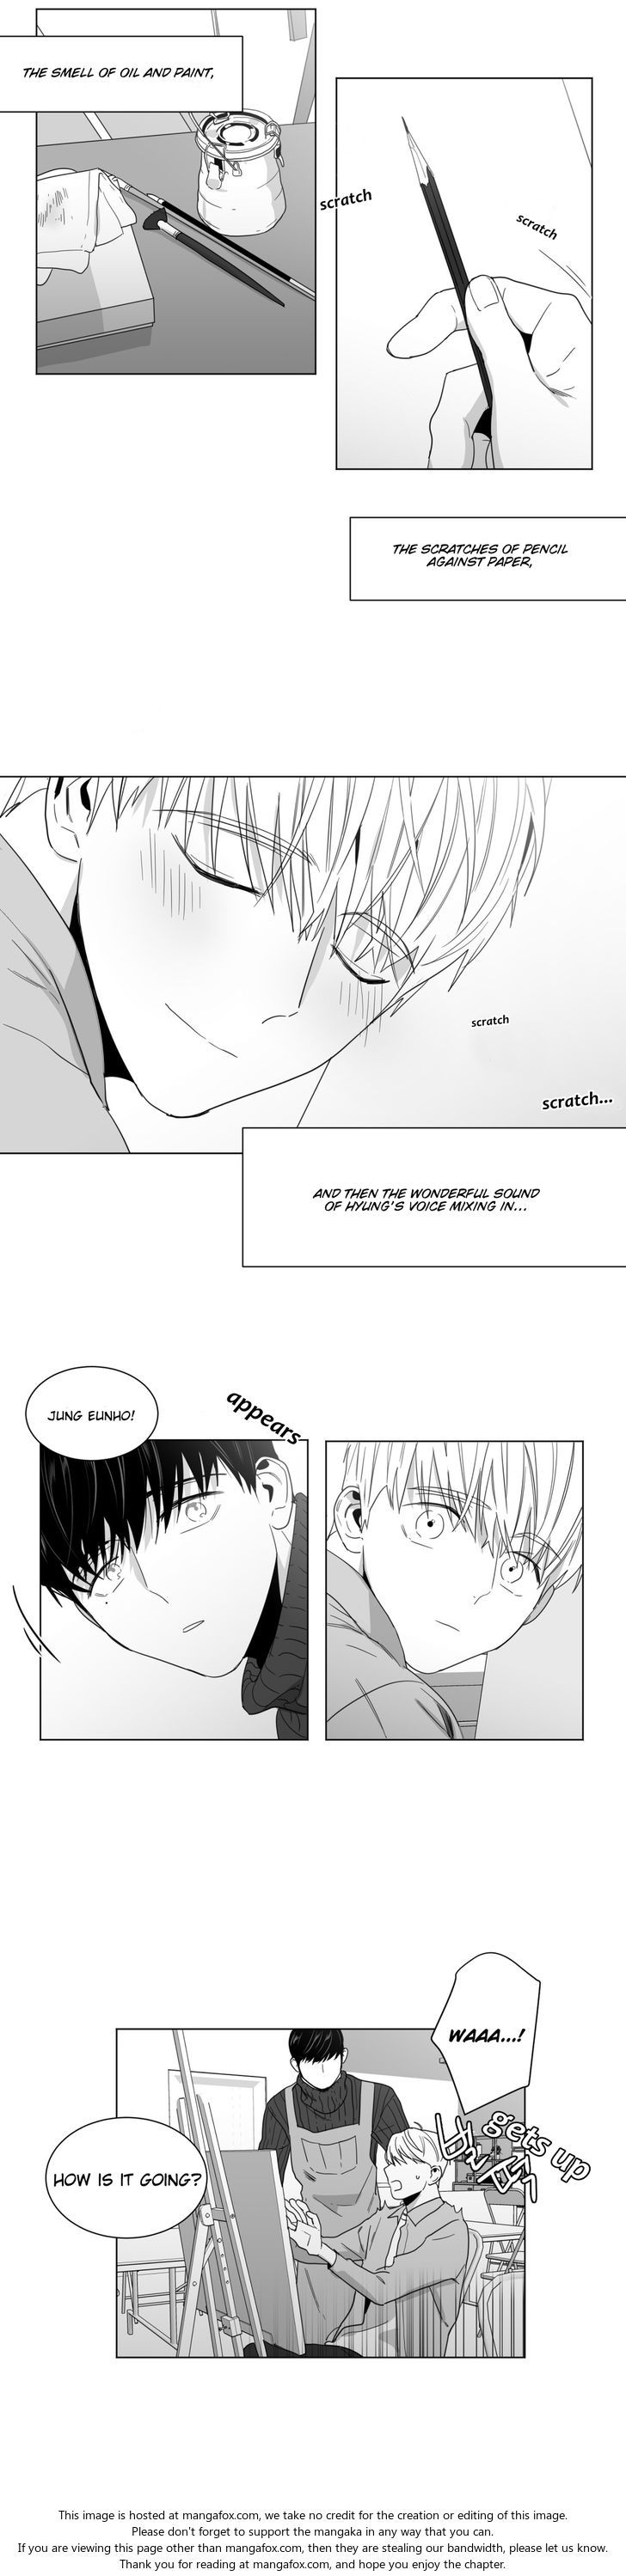 Lover Boy (Lezhin) Chapter 018 page 8